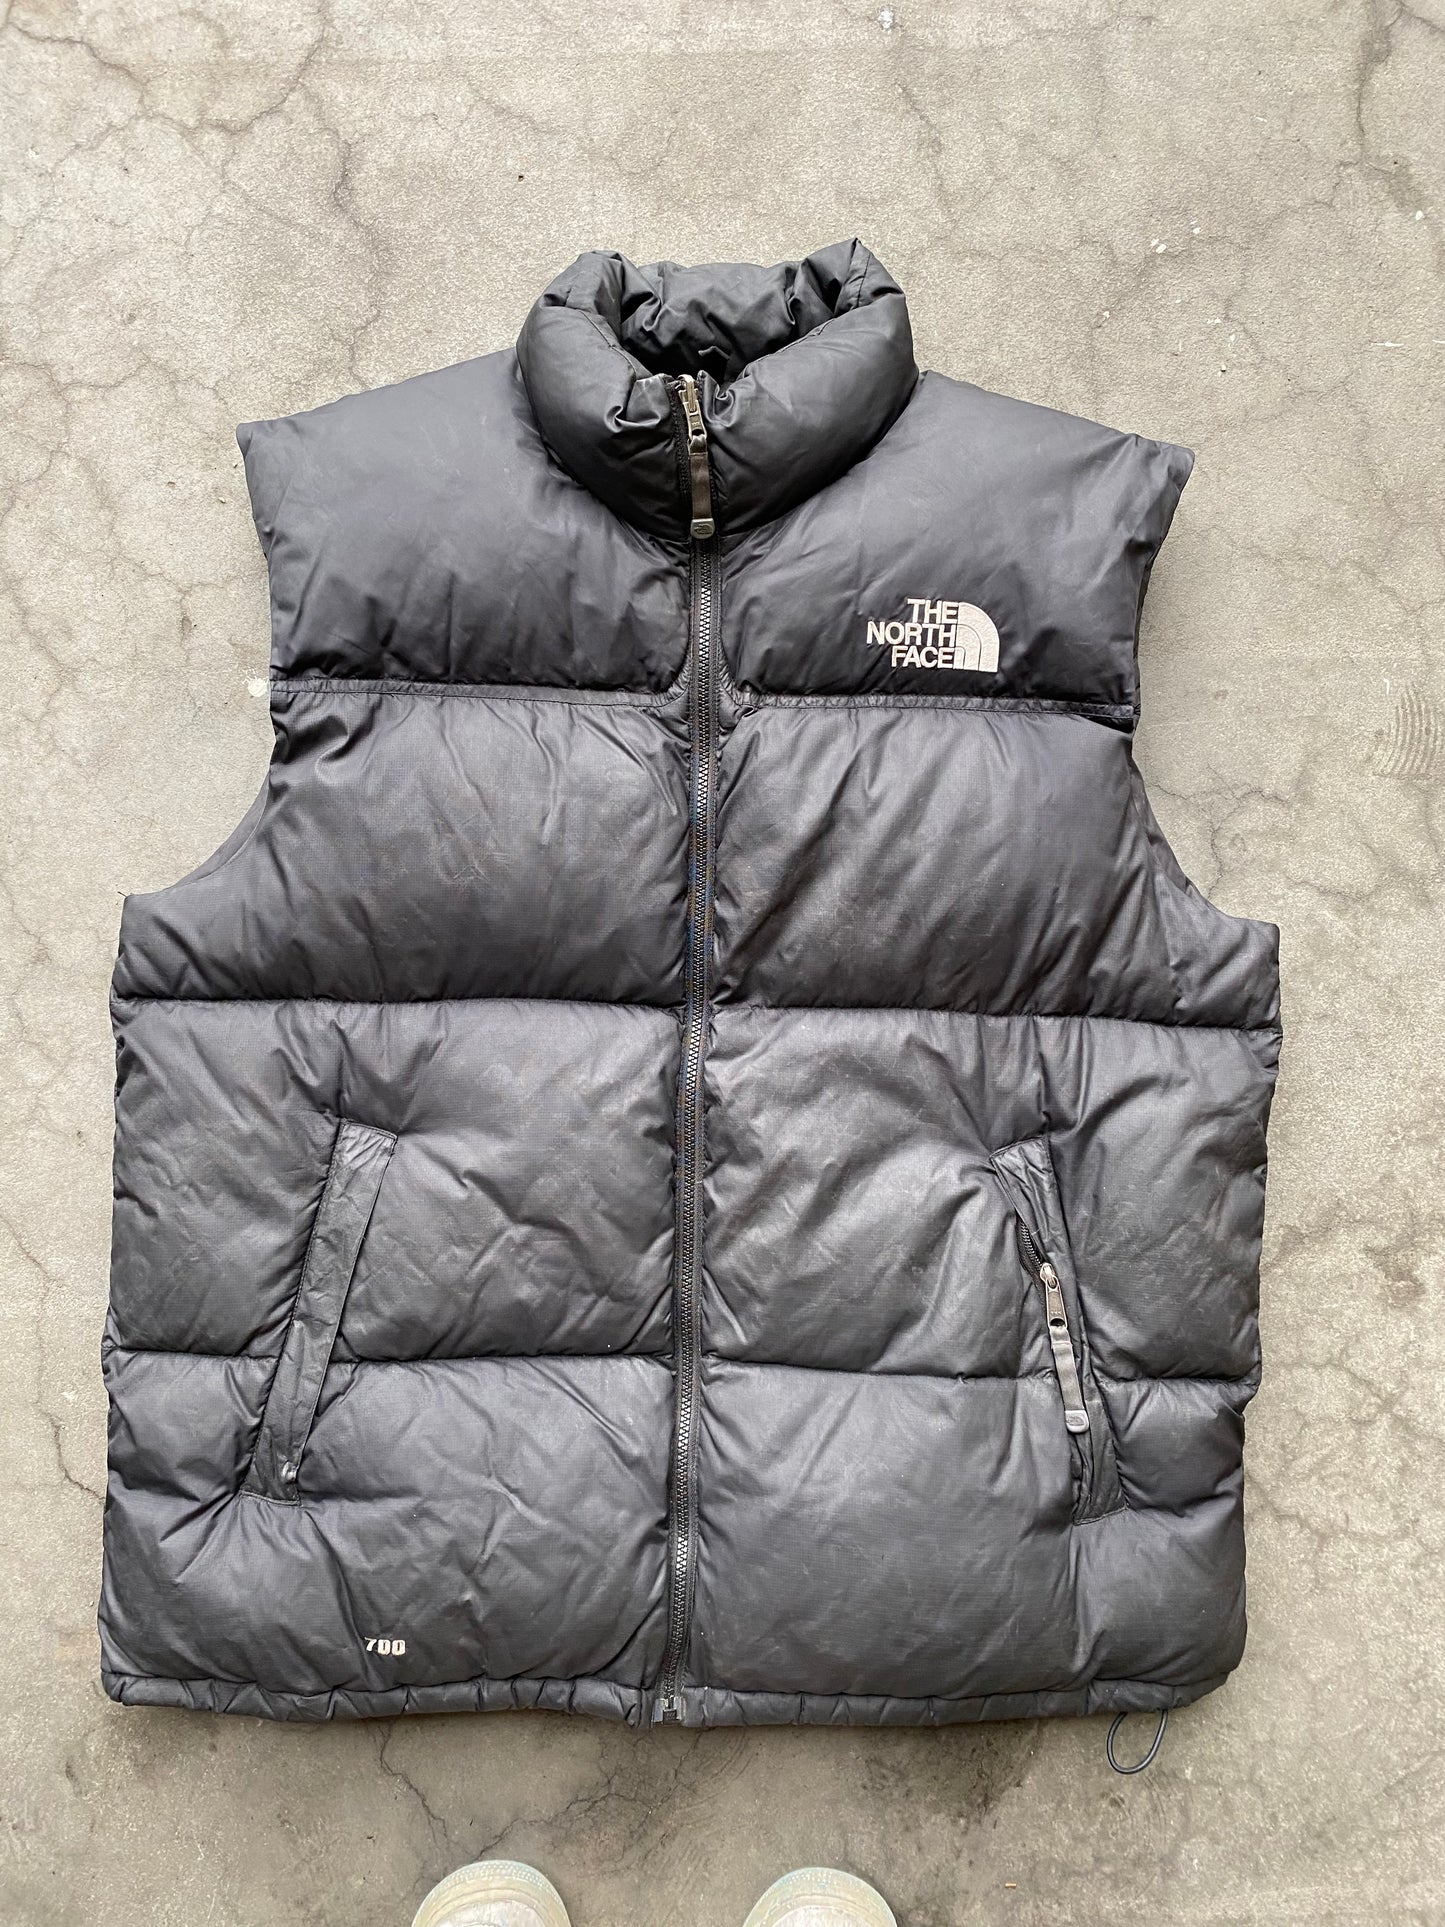 (2X) The North Face 700 Vest